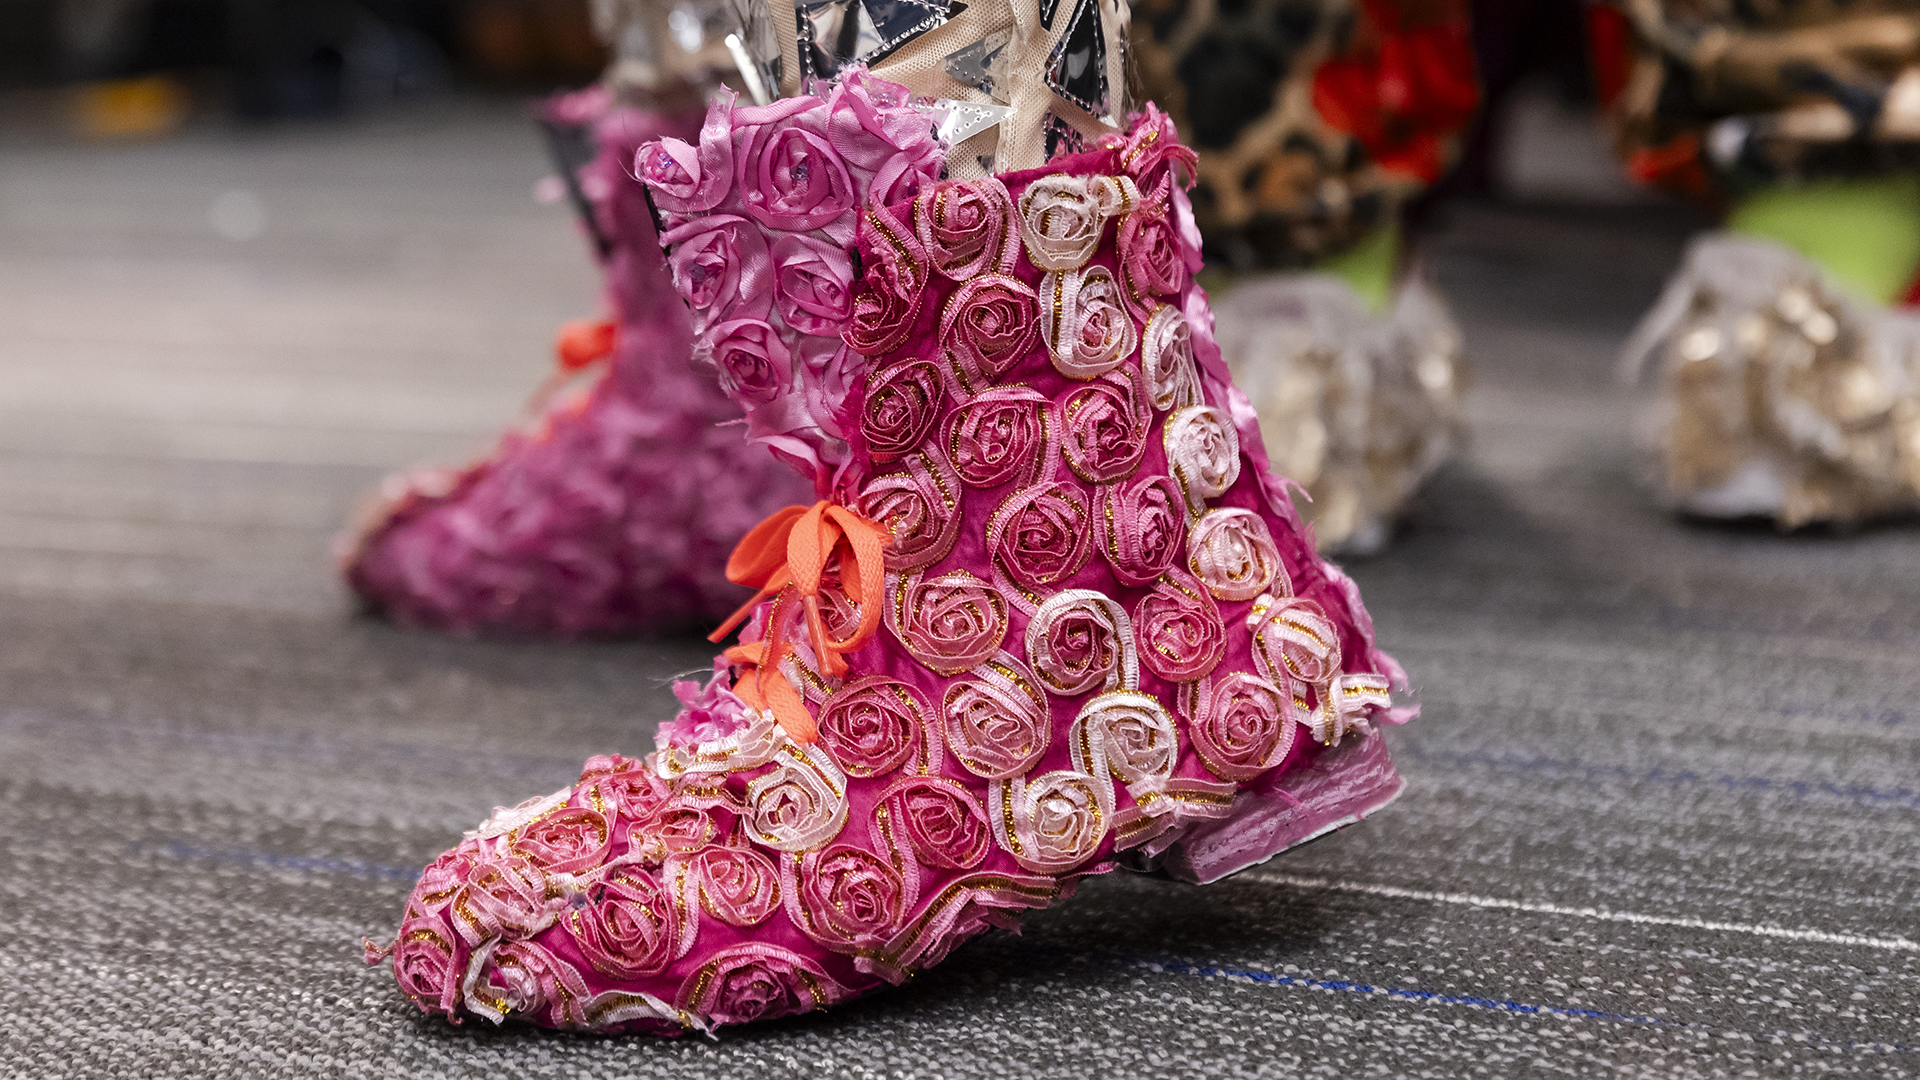 A closeup of a person's feet wearing low-top boots completely covered in pink and white fabric in the shape of little roses